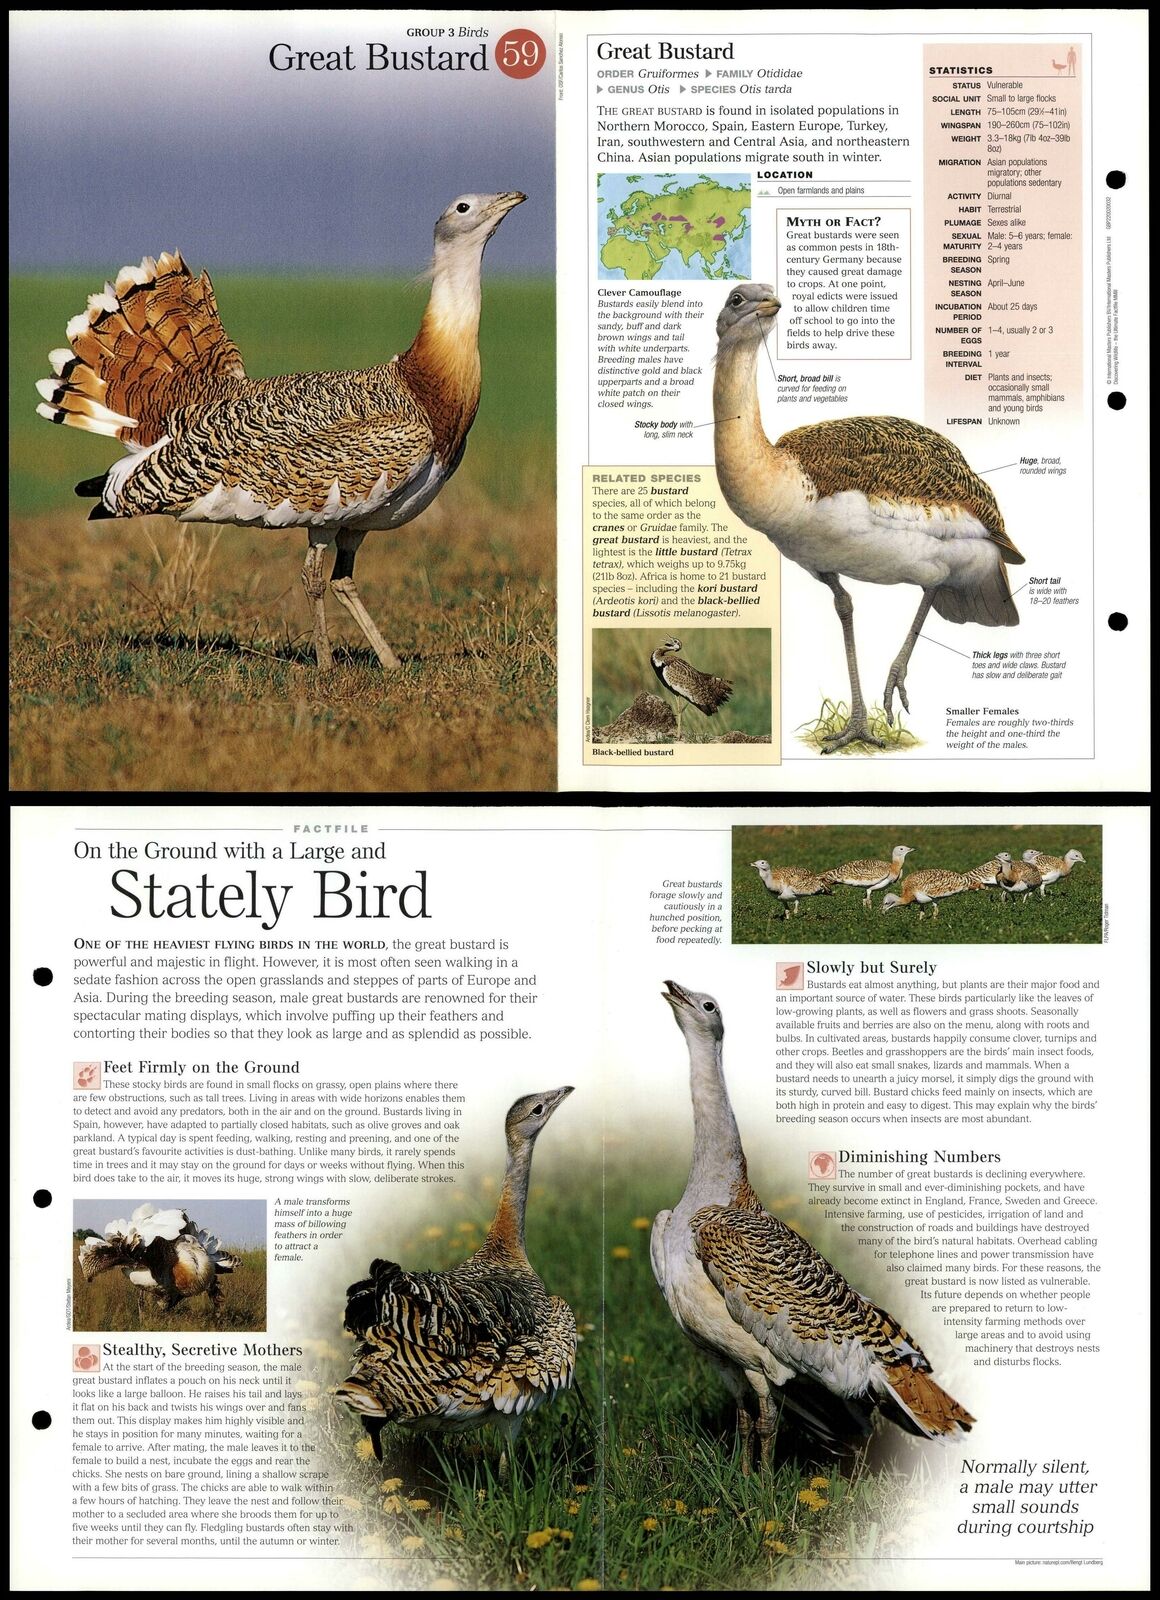 Great Bustard #59 Birds - Discovering Wildlife Fact File Fold-Out Card